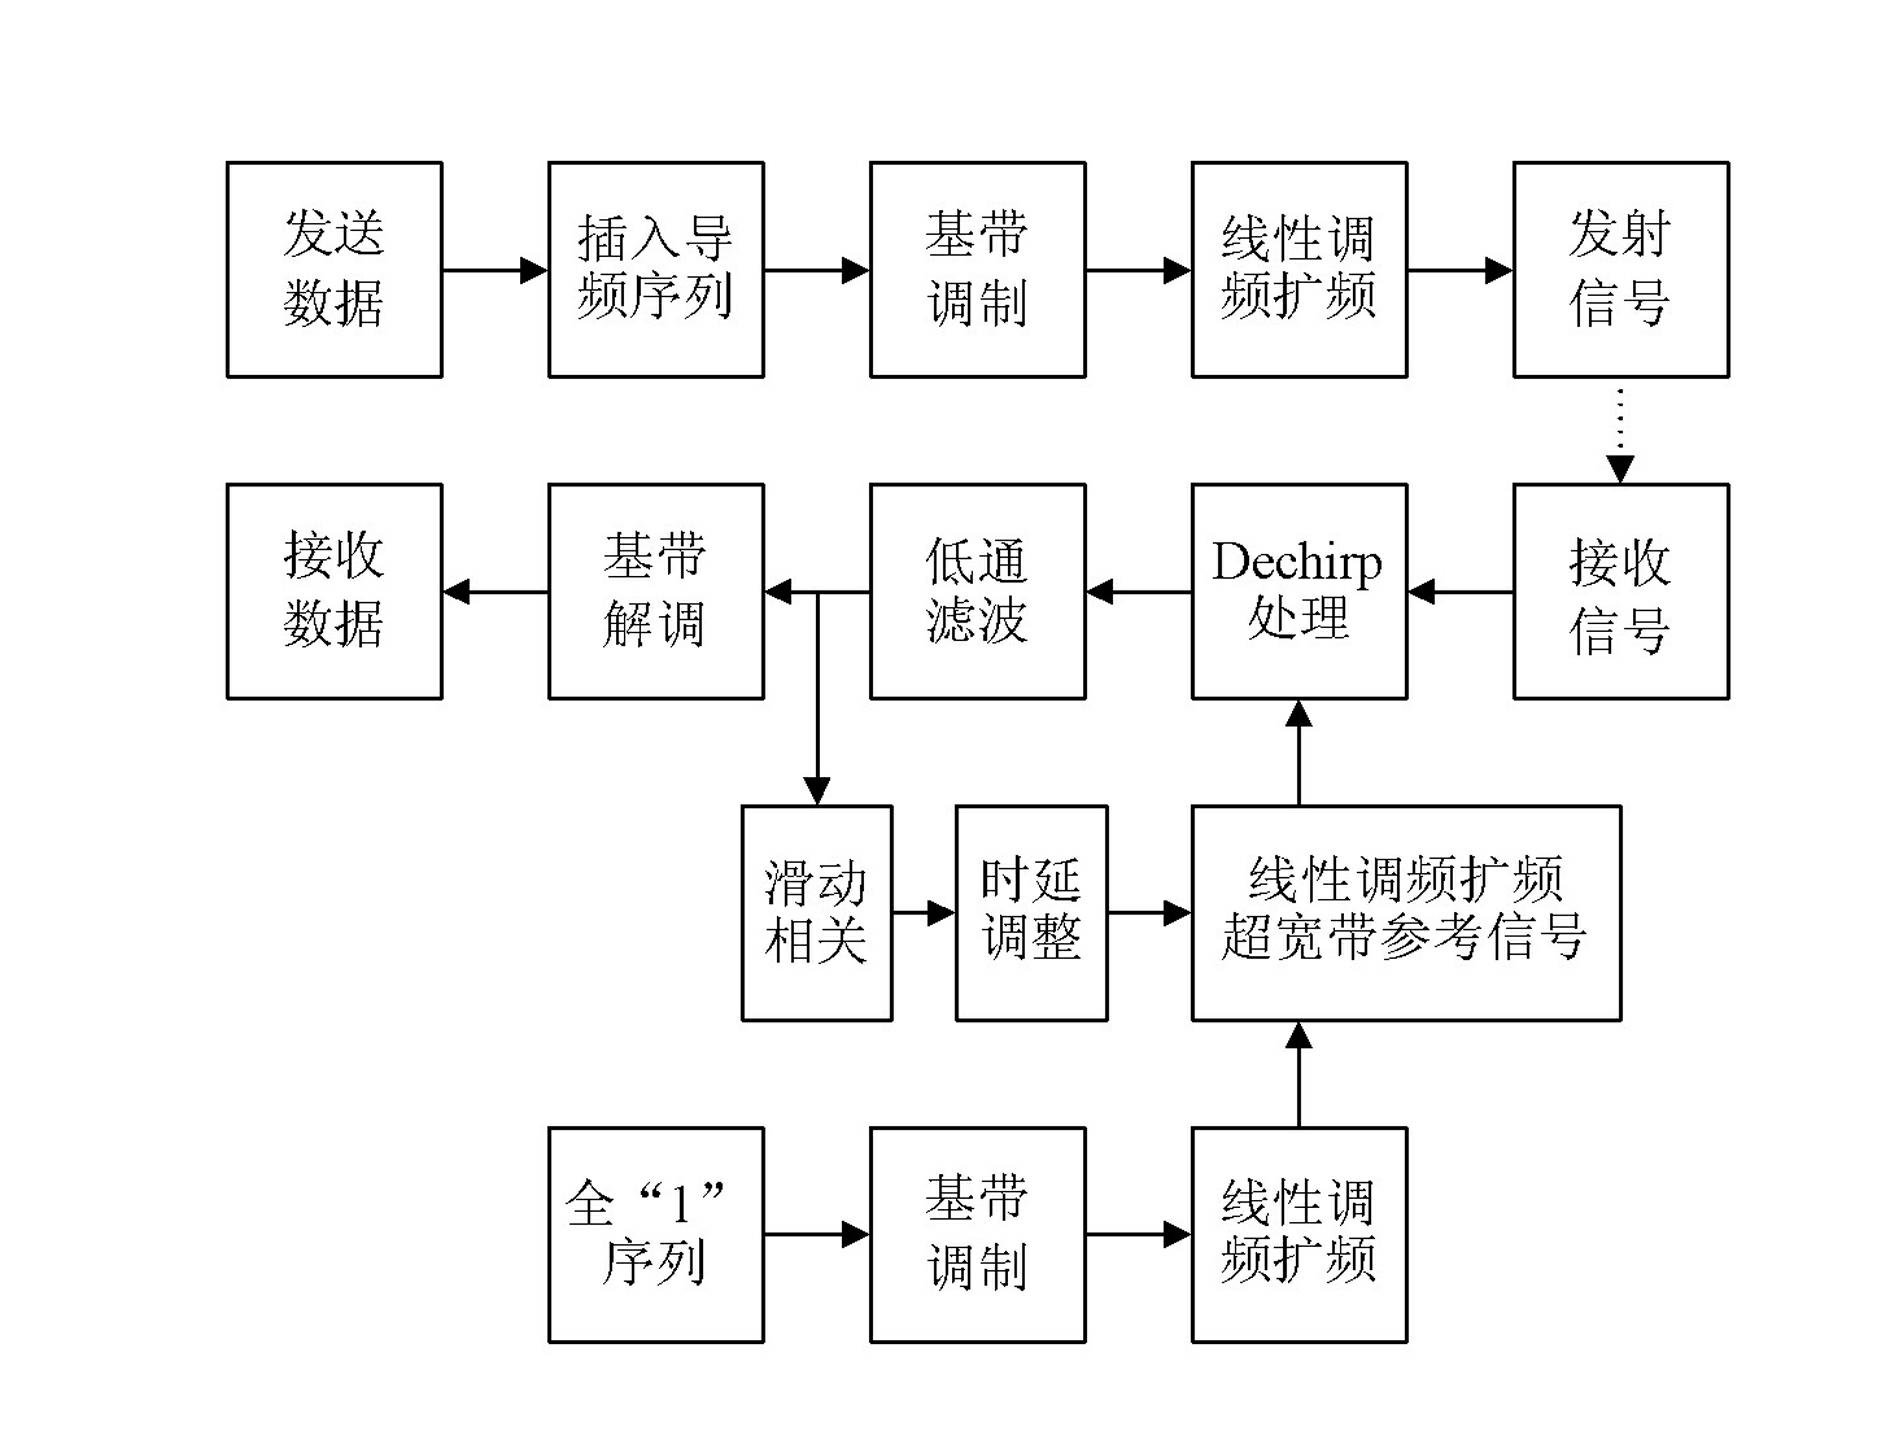 Ultra-wideband communication method based on time-frequency conversion and slippage correlation